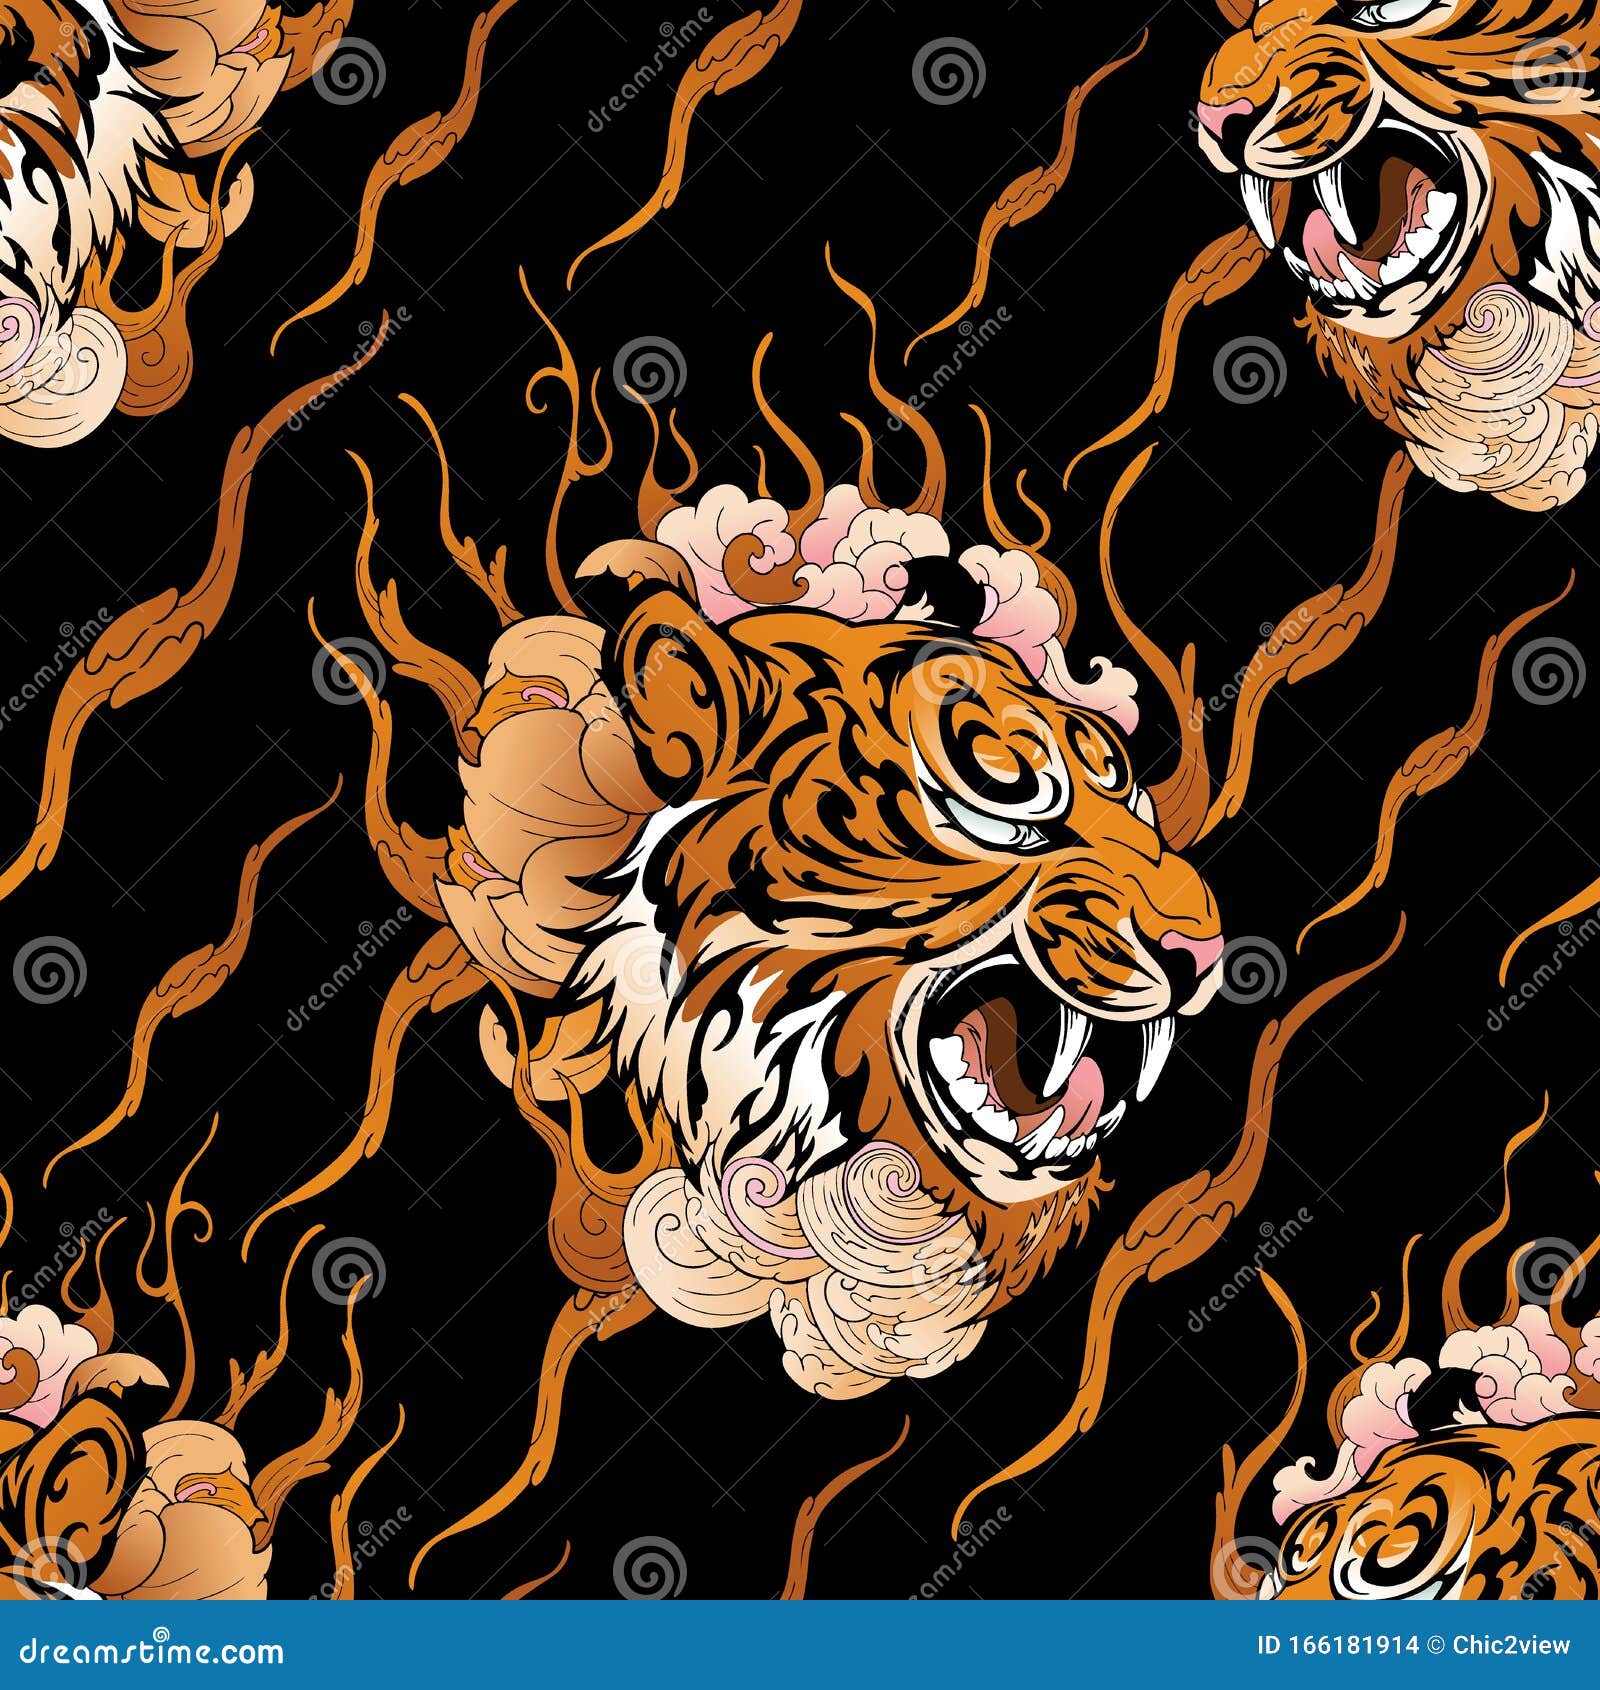 5,423 Sumatra Tiger Wild Images, Stock Photos, 3D objects, & Vectors |  Shutterstock